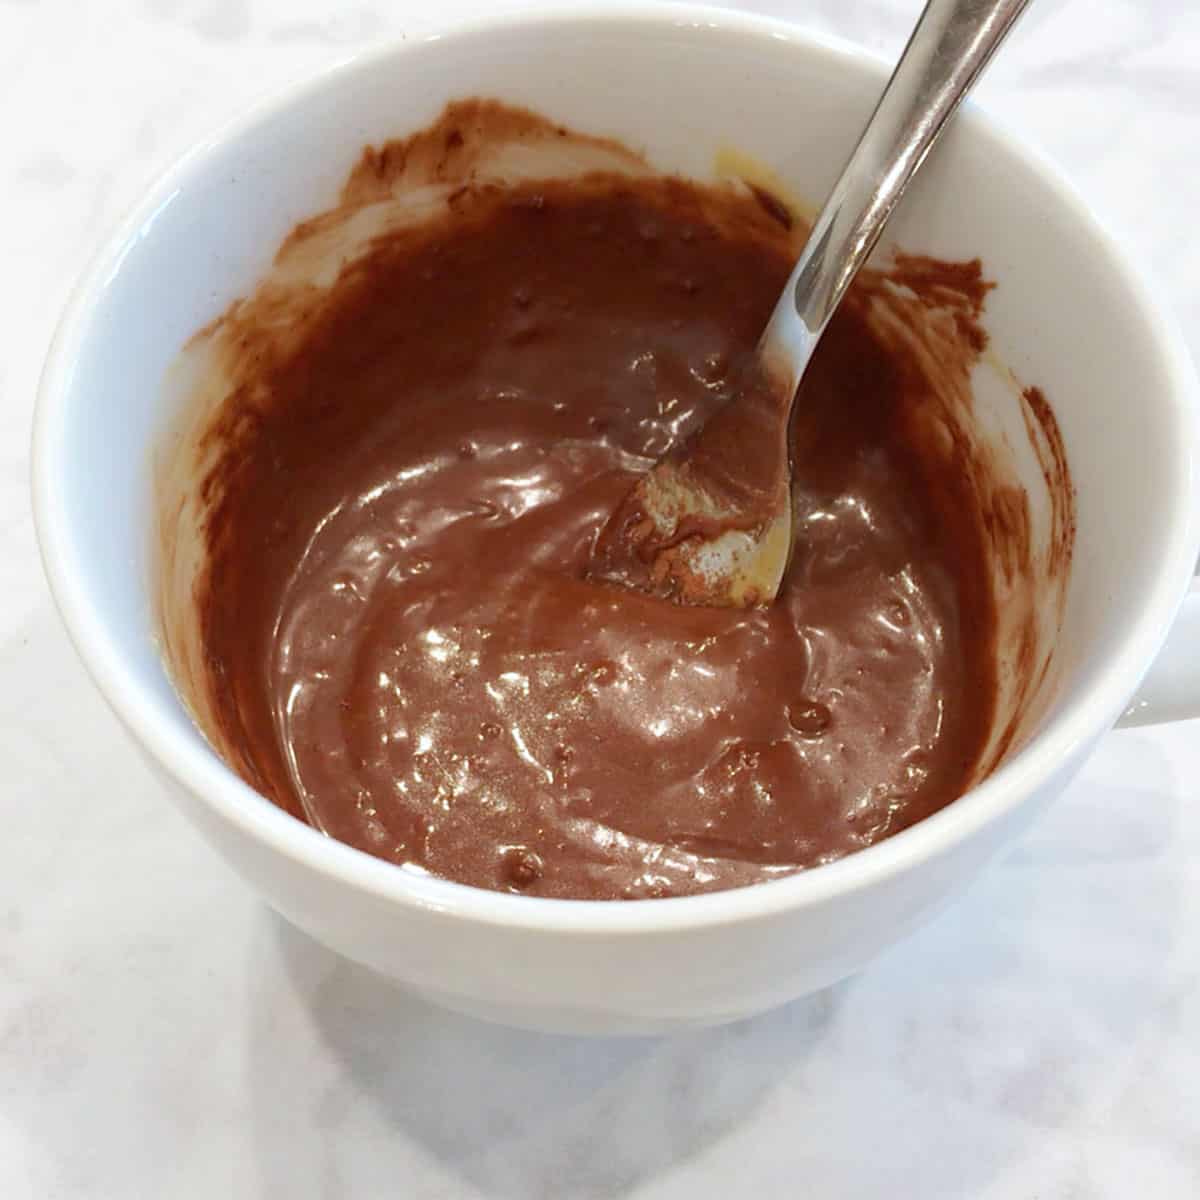 Cocoa powder was mixed into the batter.